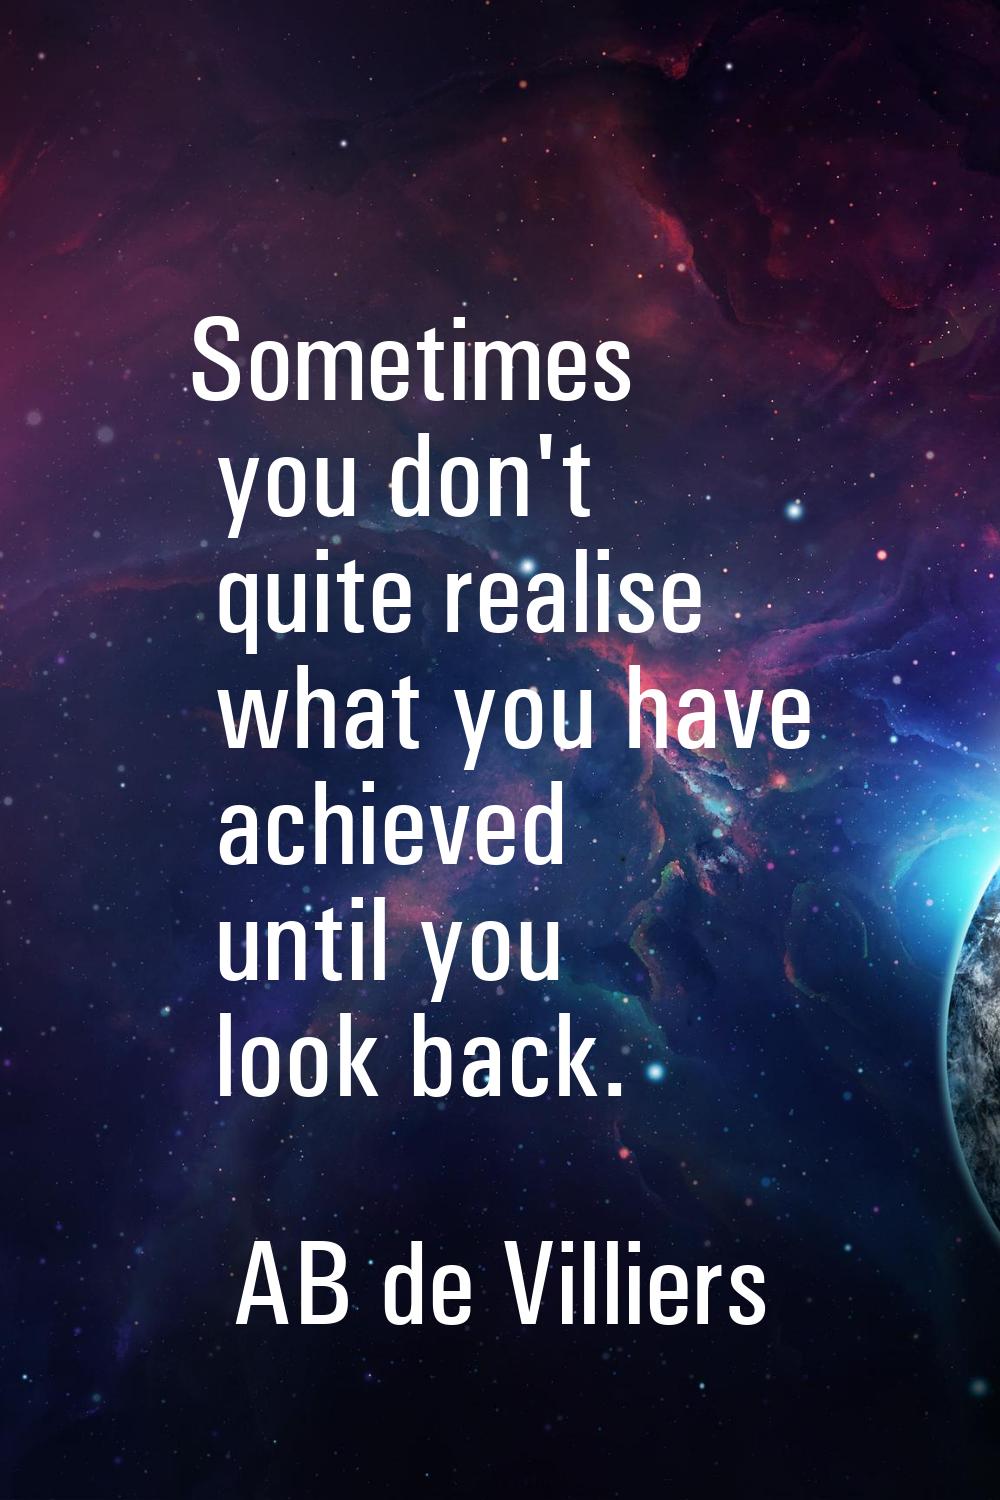 Sometimes you don't quite realise what you have achieved until you look back.